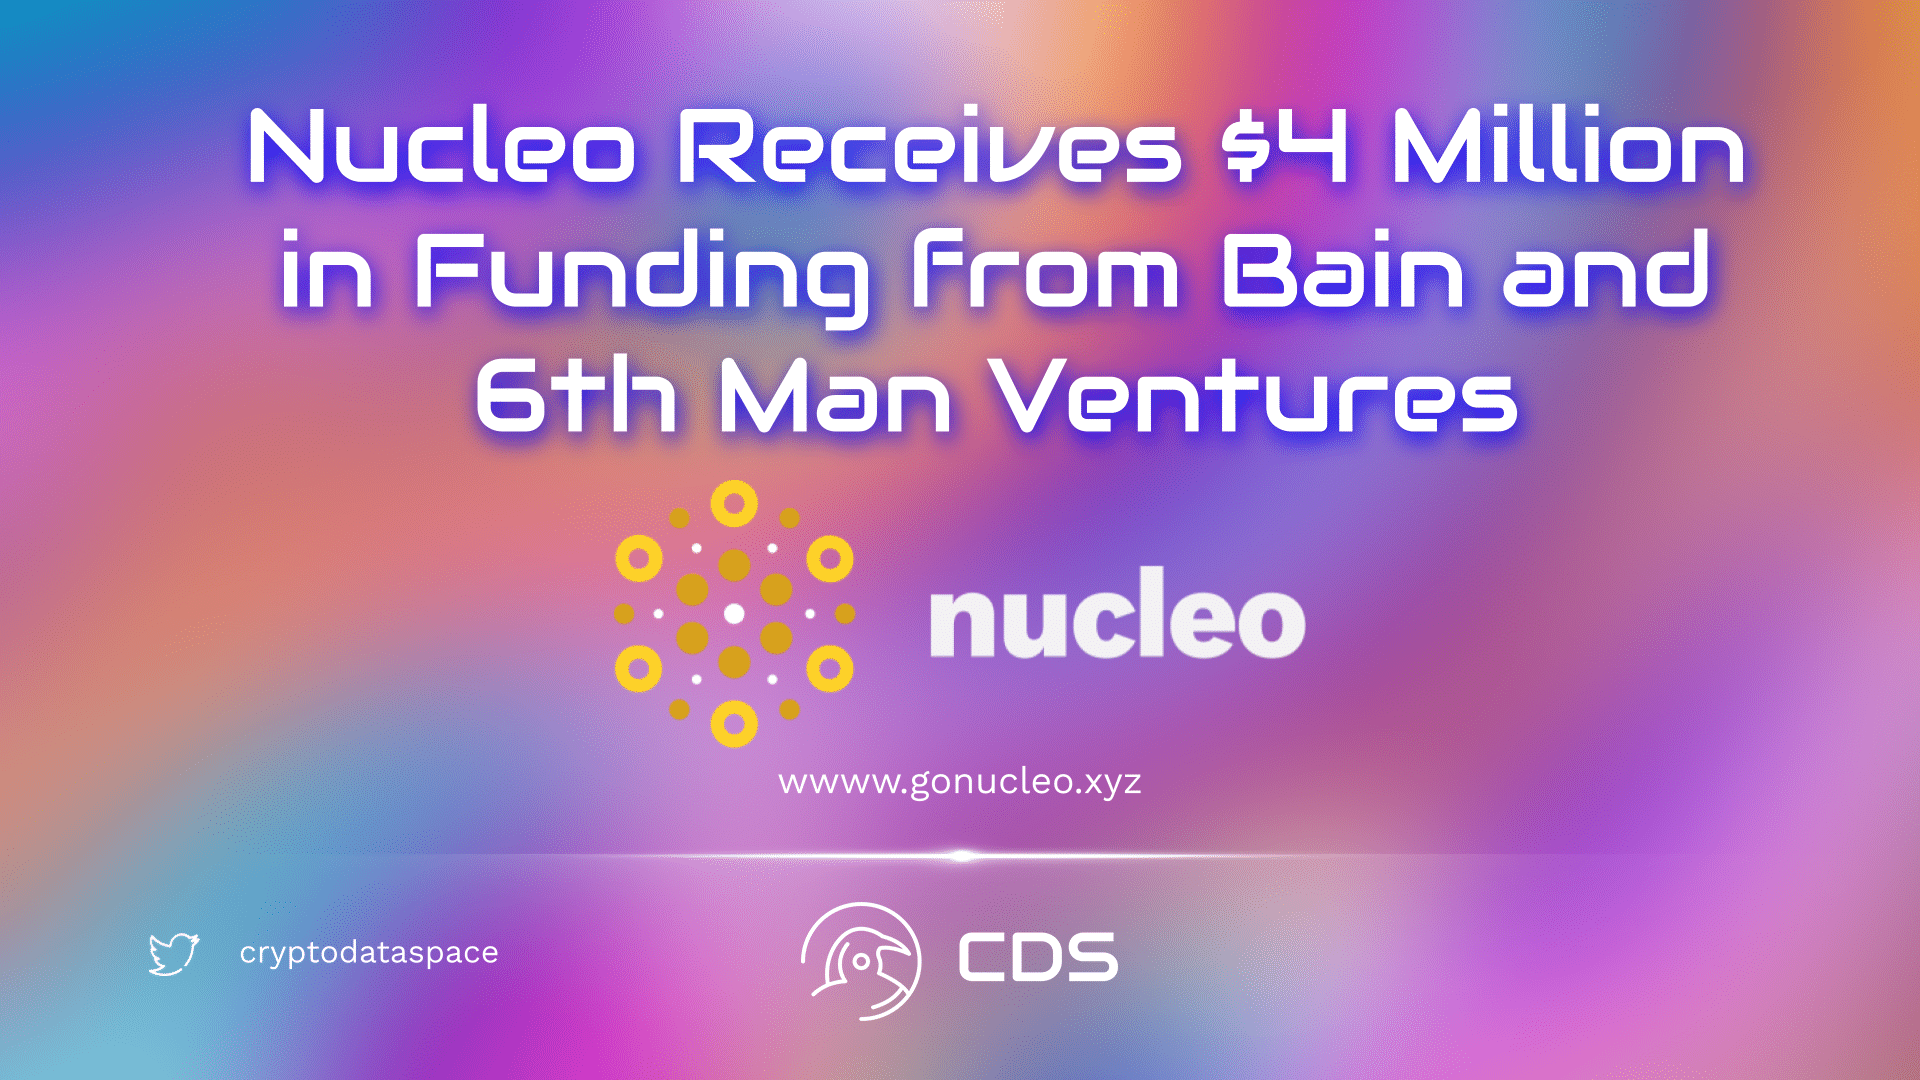 Nucleo Receives $4 Million in Funding from Bain and 6th Man Ventures